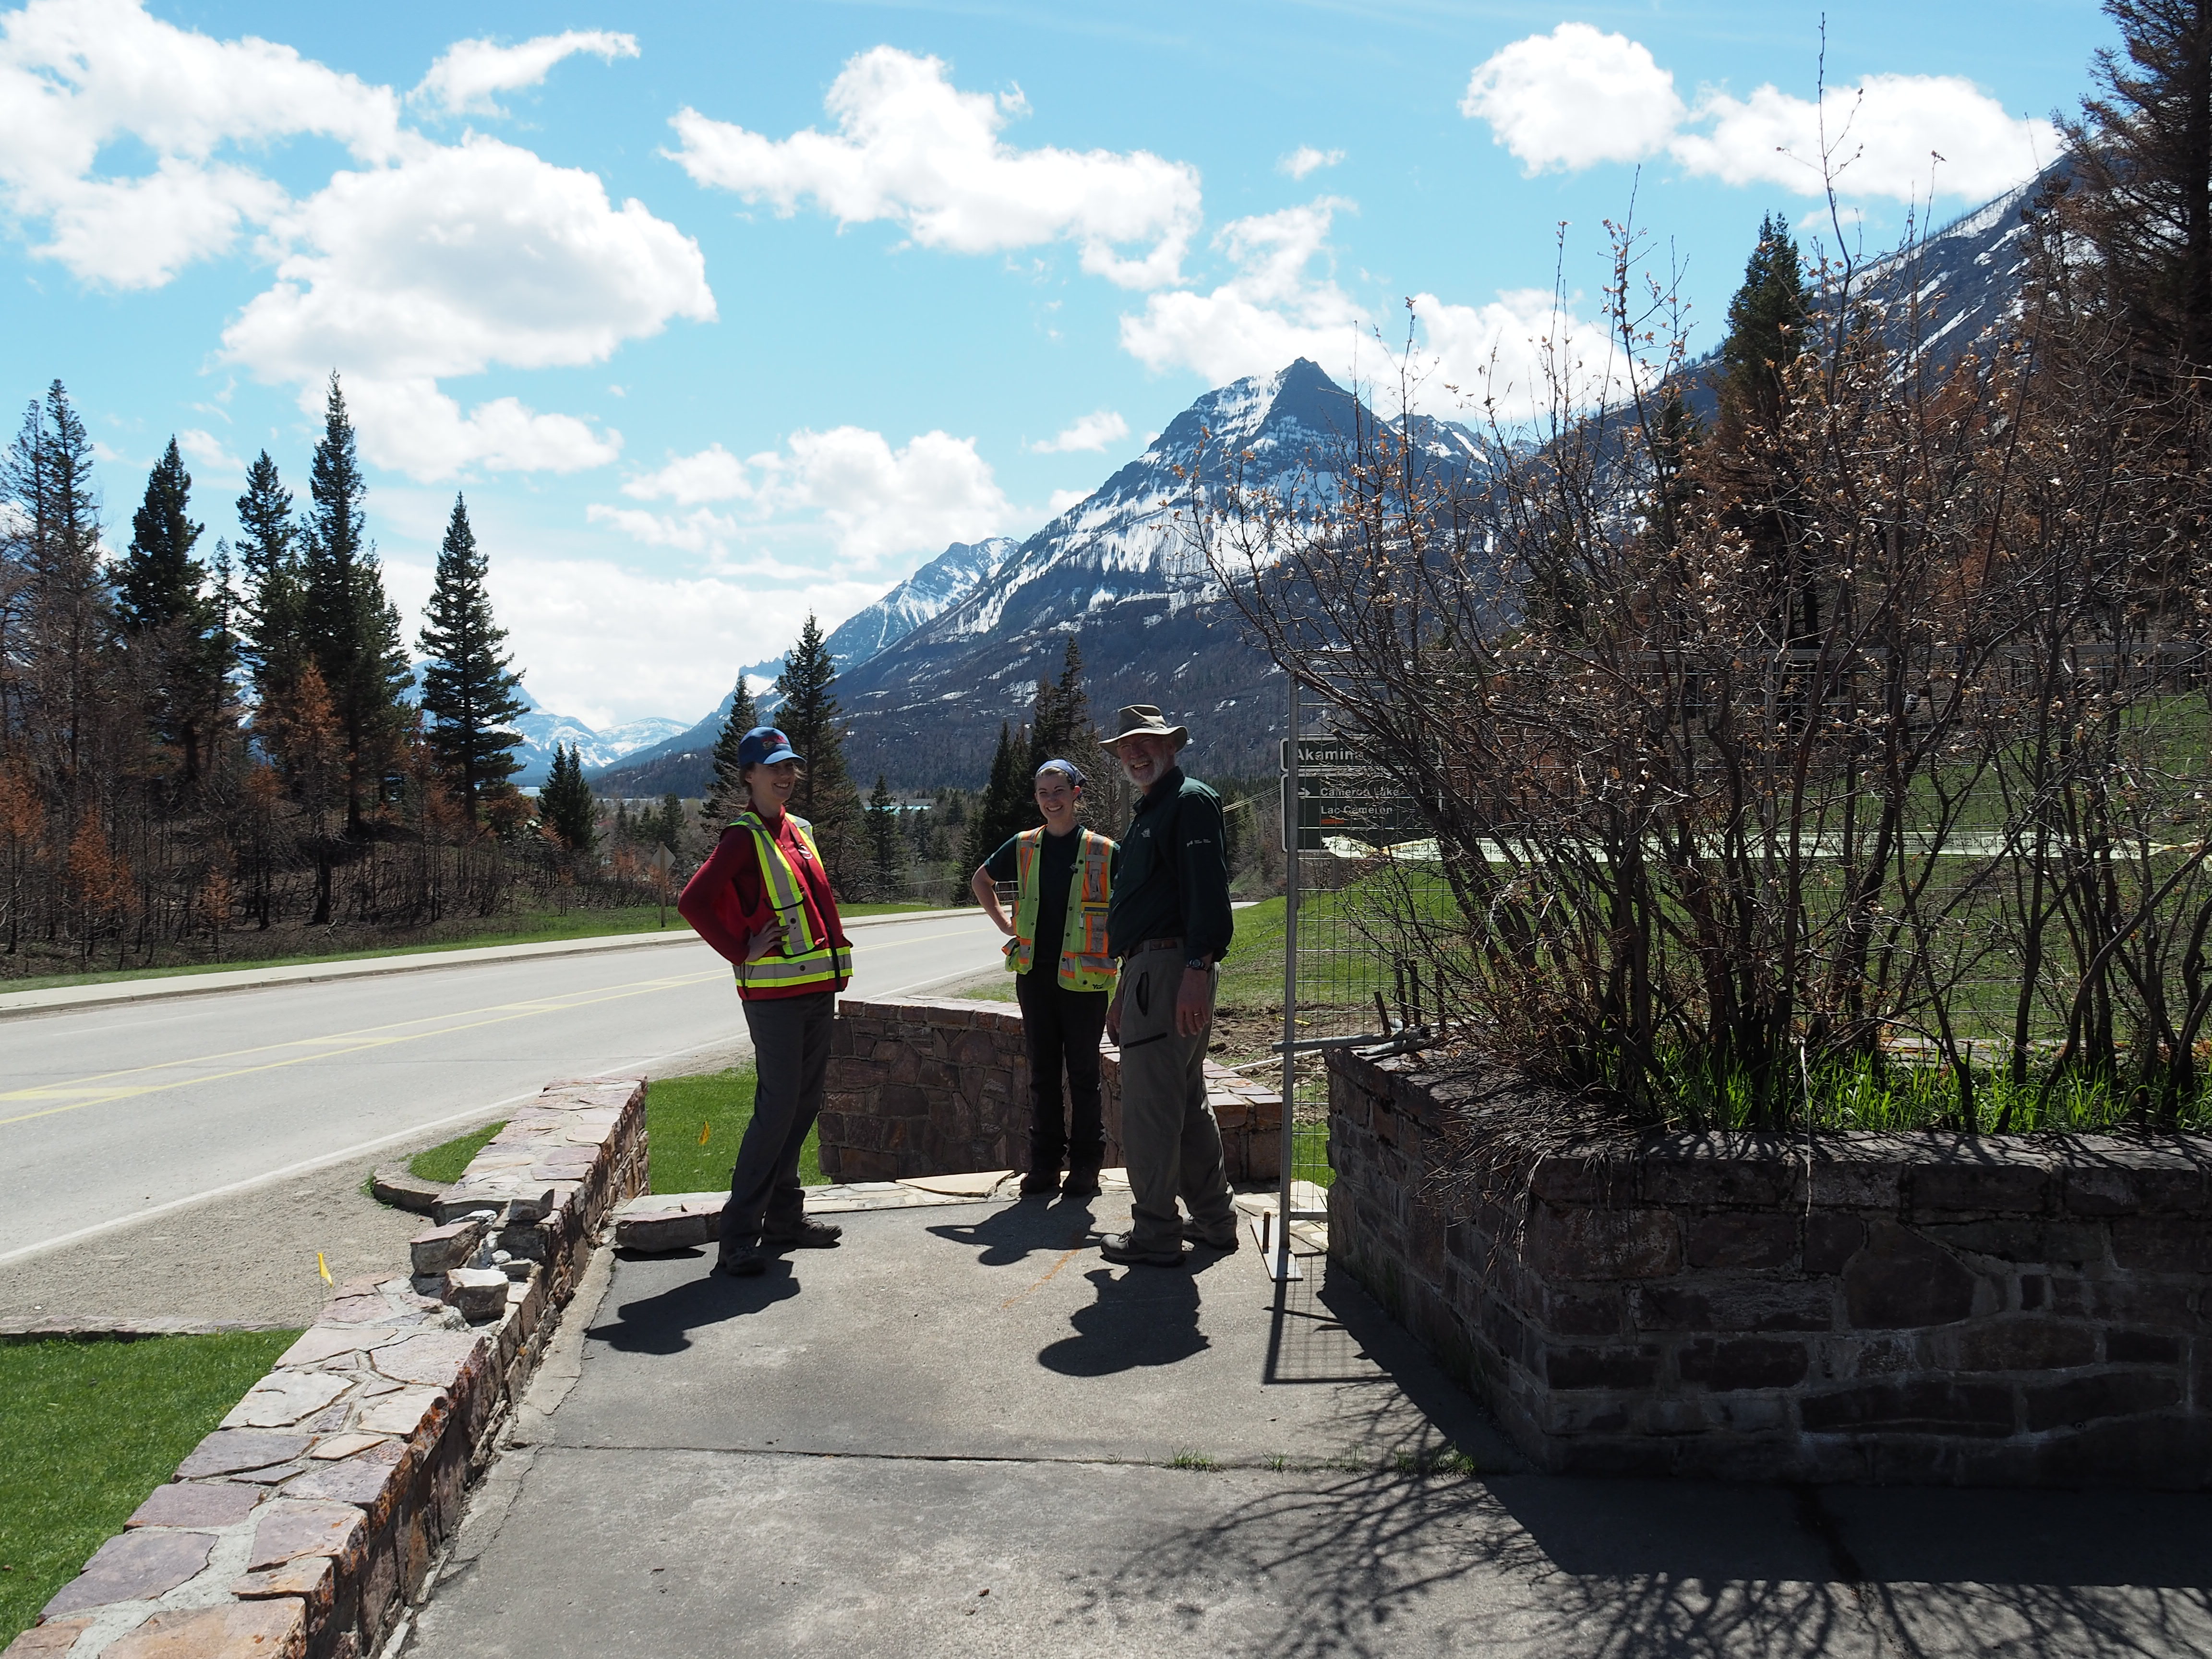 Parks Canada Staff waiting for scanner to complete a scan at the Information Bureau, 07 May 2018.